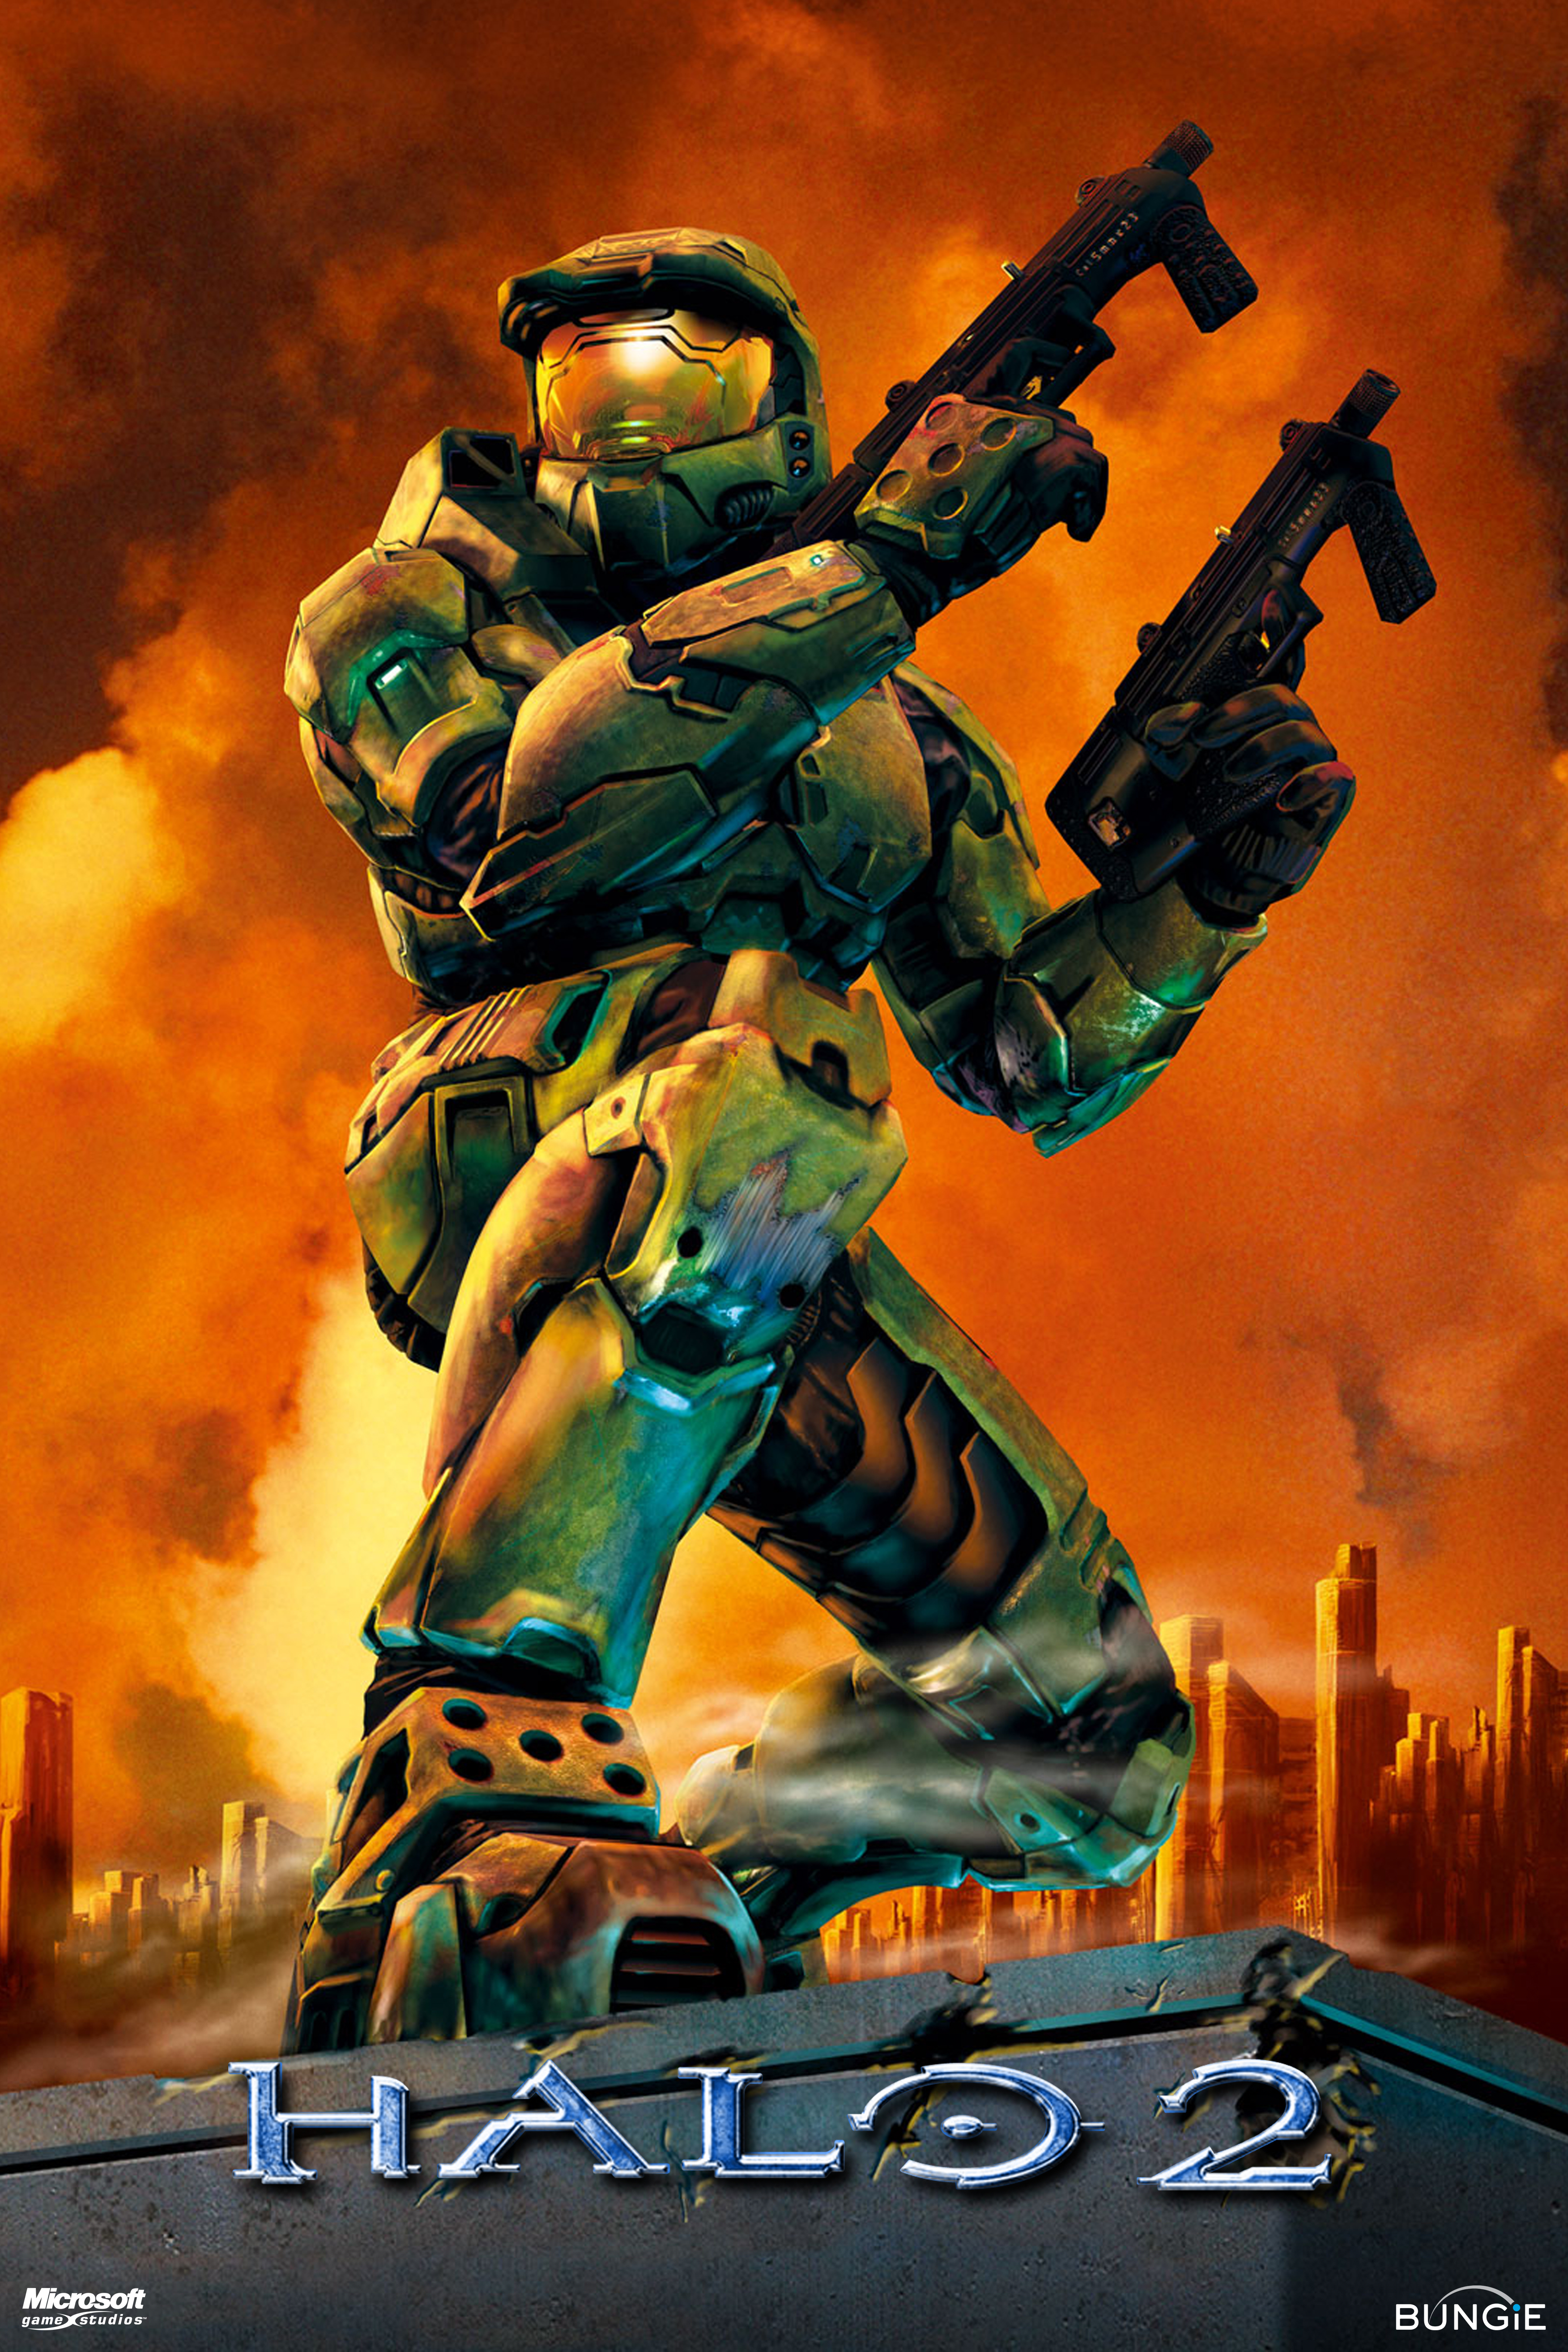 Halo 2 Poster - Anyone have an idea where to find? : halo